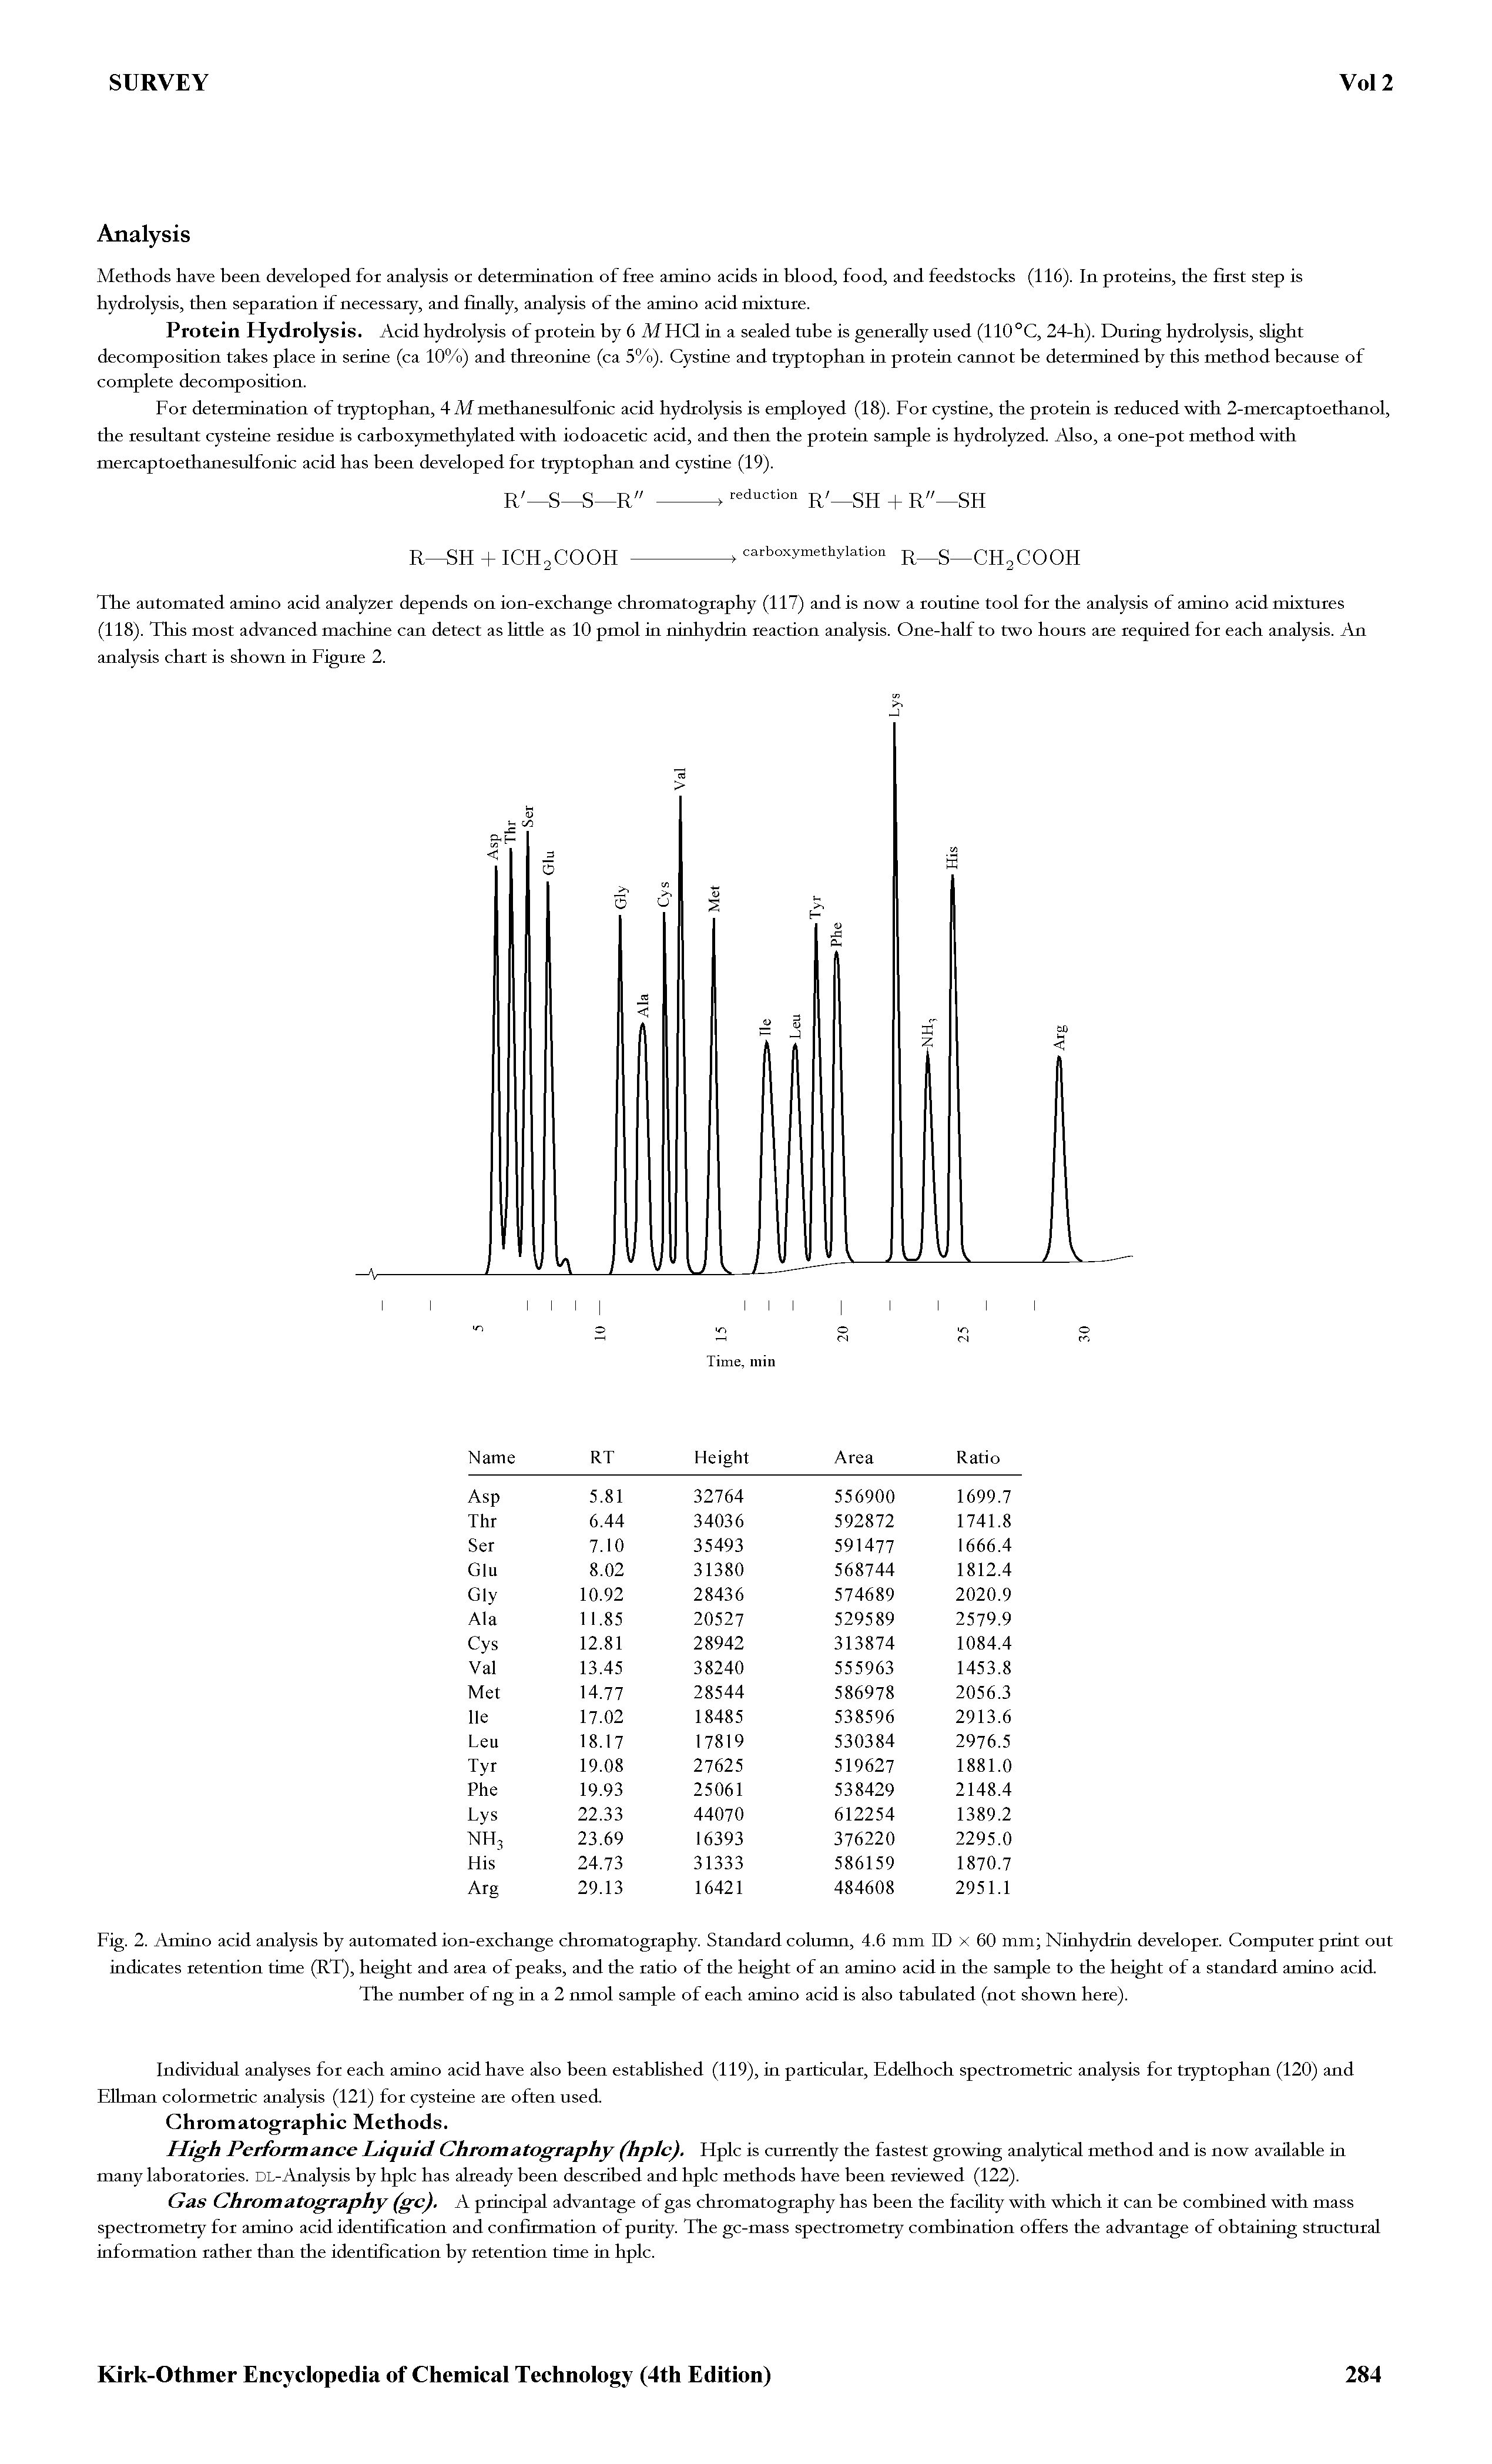 Fig. 2. Amino acid analysis by automated ion-exchange chromatography. Standard column, 4.6 mm ID x 60 mm Ninhydrin developer. Computer print out indicates retention time (RT), height and area of peaks, and the ratio of the height of an amino acid in the sample to the height of a standard amino acid.